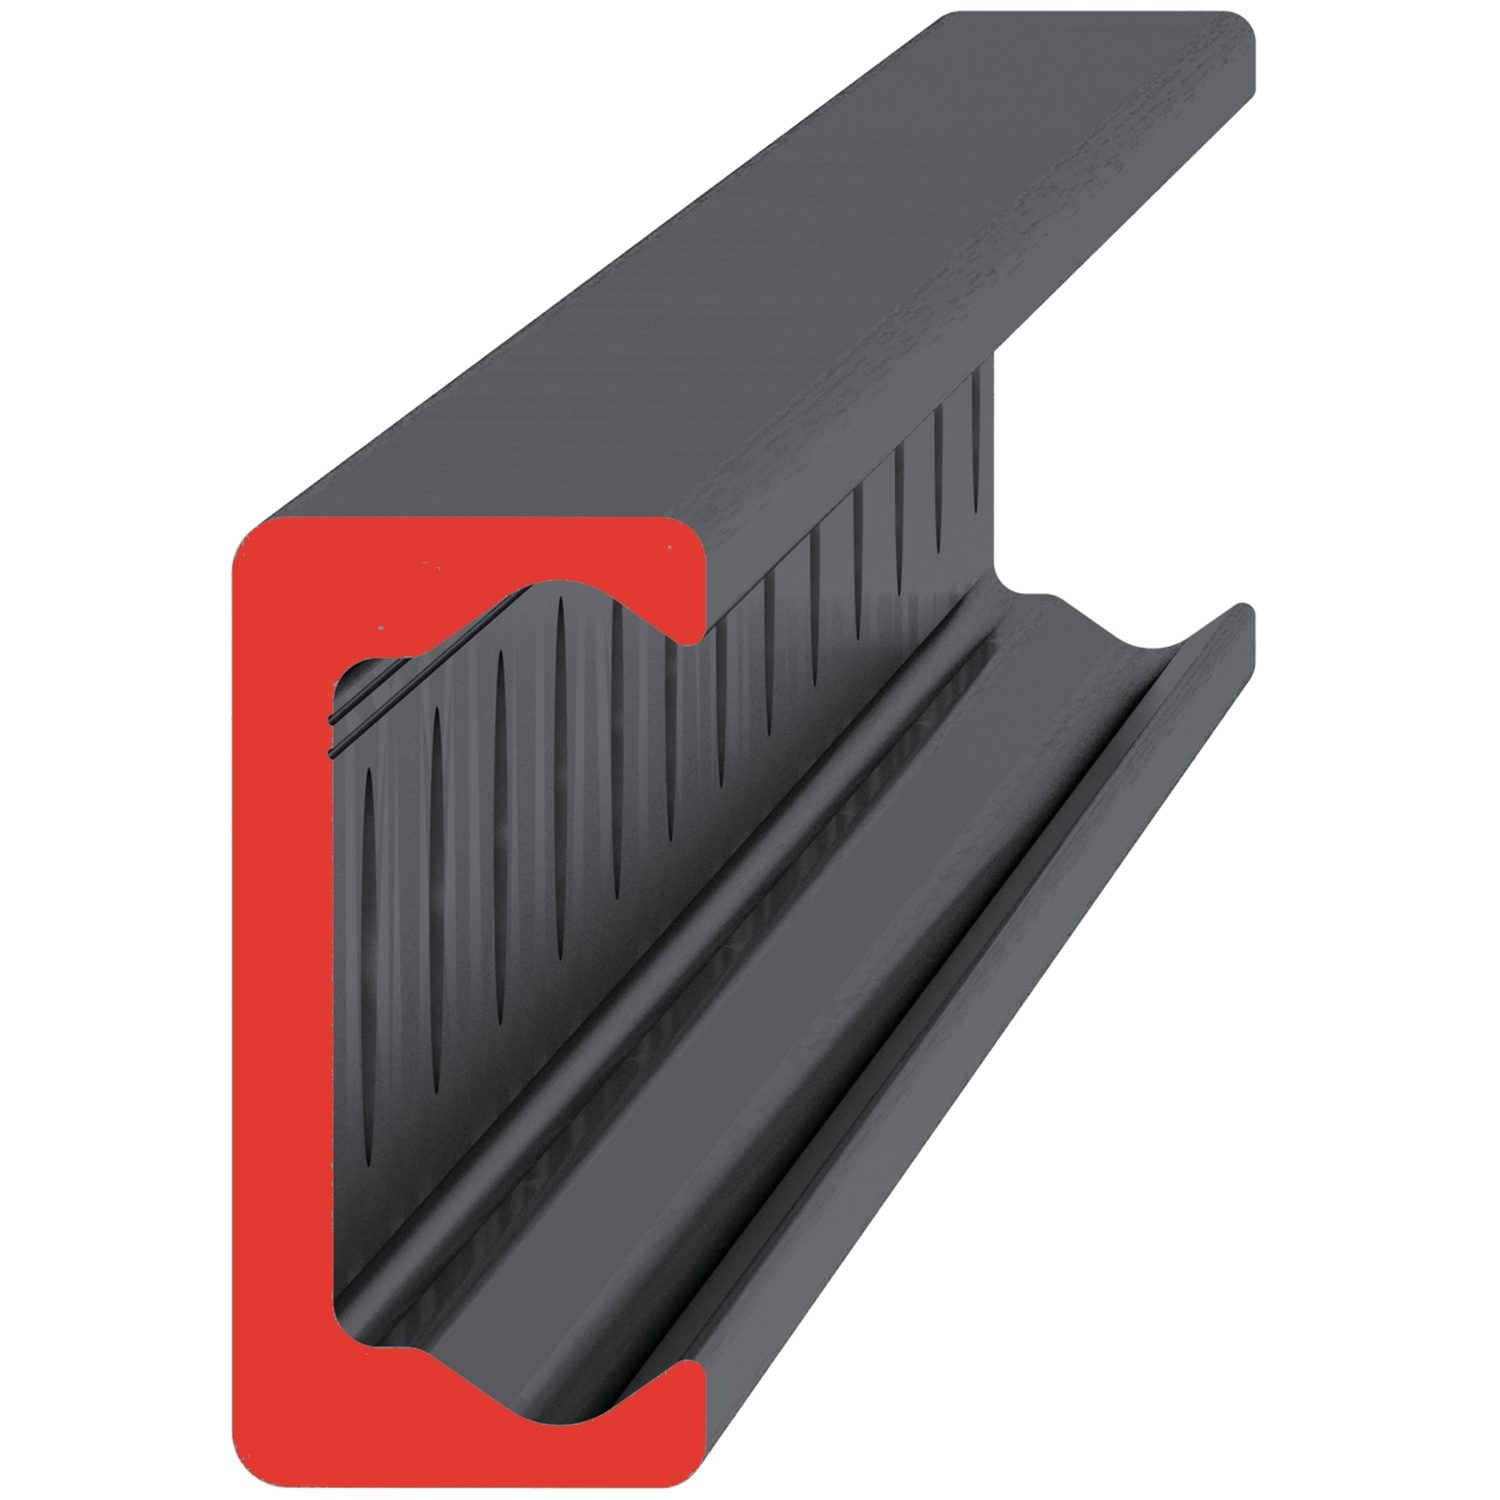 Easy to Install Rails Medium duty guideways made of carbon steel with induction-hardened steel raceways. Counterbored. For use with L1935.CS sliders. See our compact rail technical page for more details. Excellent for applications such as sliding seats, doors etc.